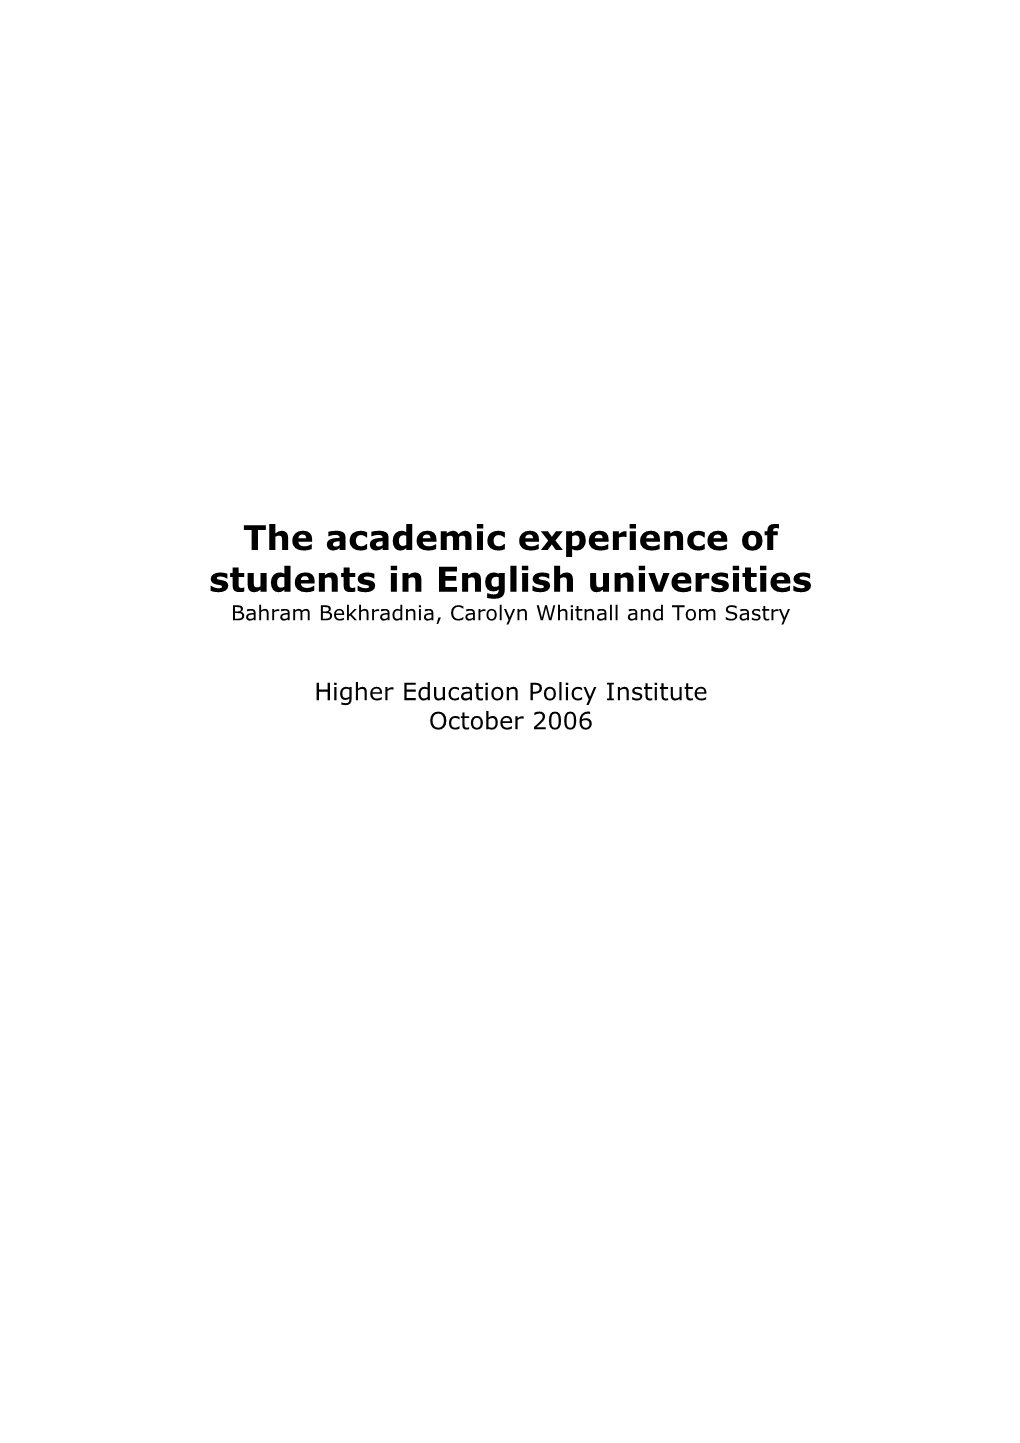 The Academic Experience of Students in English Universities